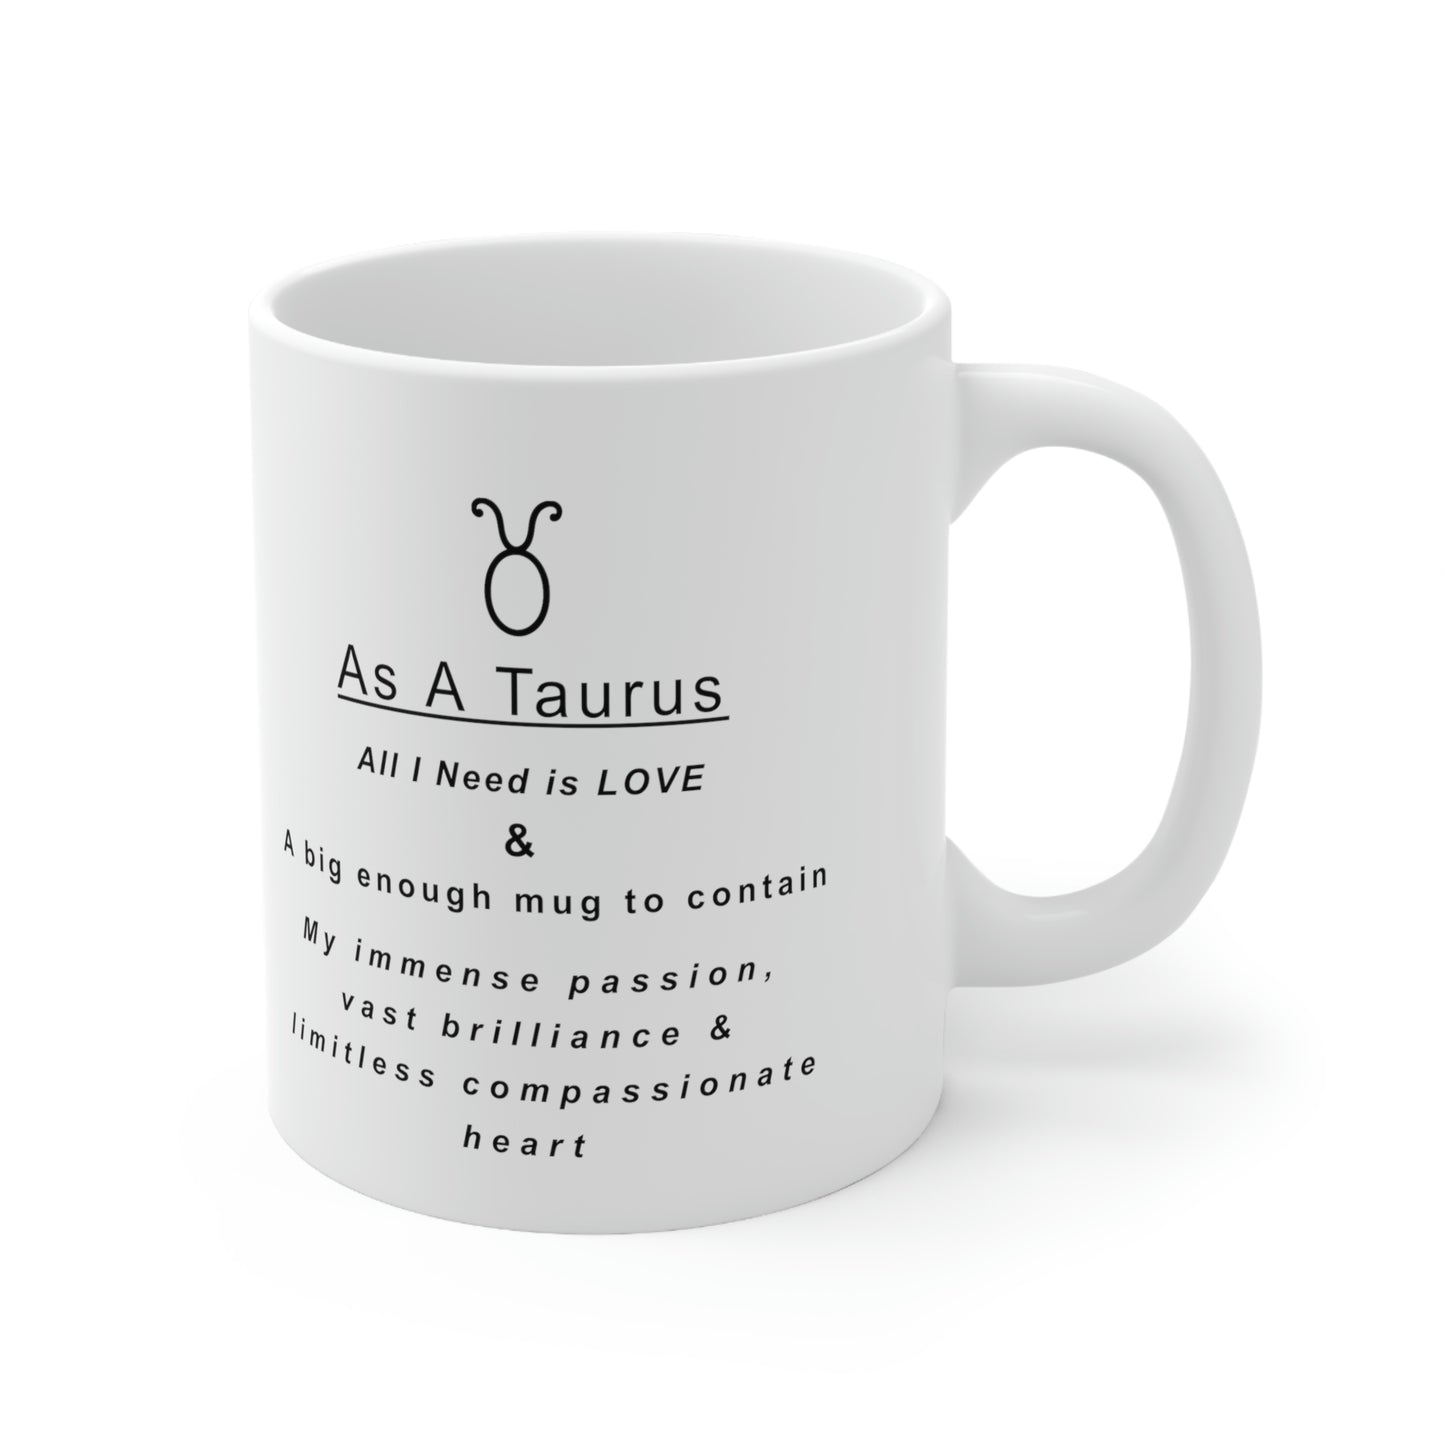 Taurus Mug: "As a Taurus all I need is love and...." - full text in description